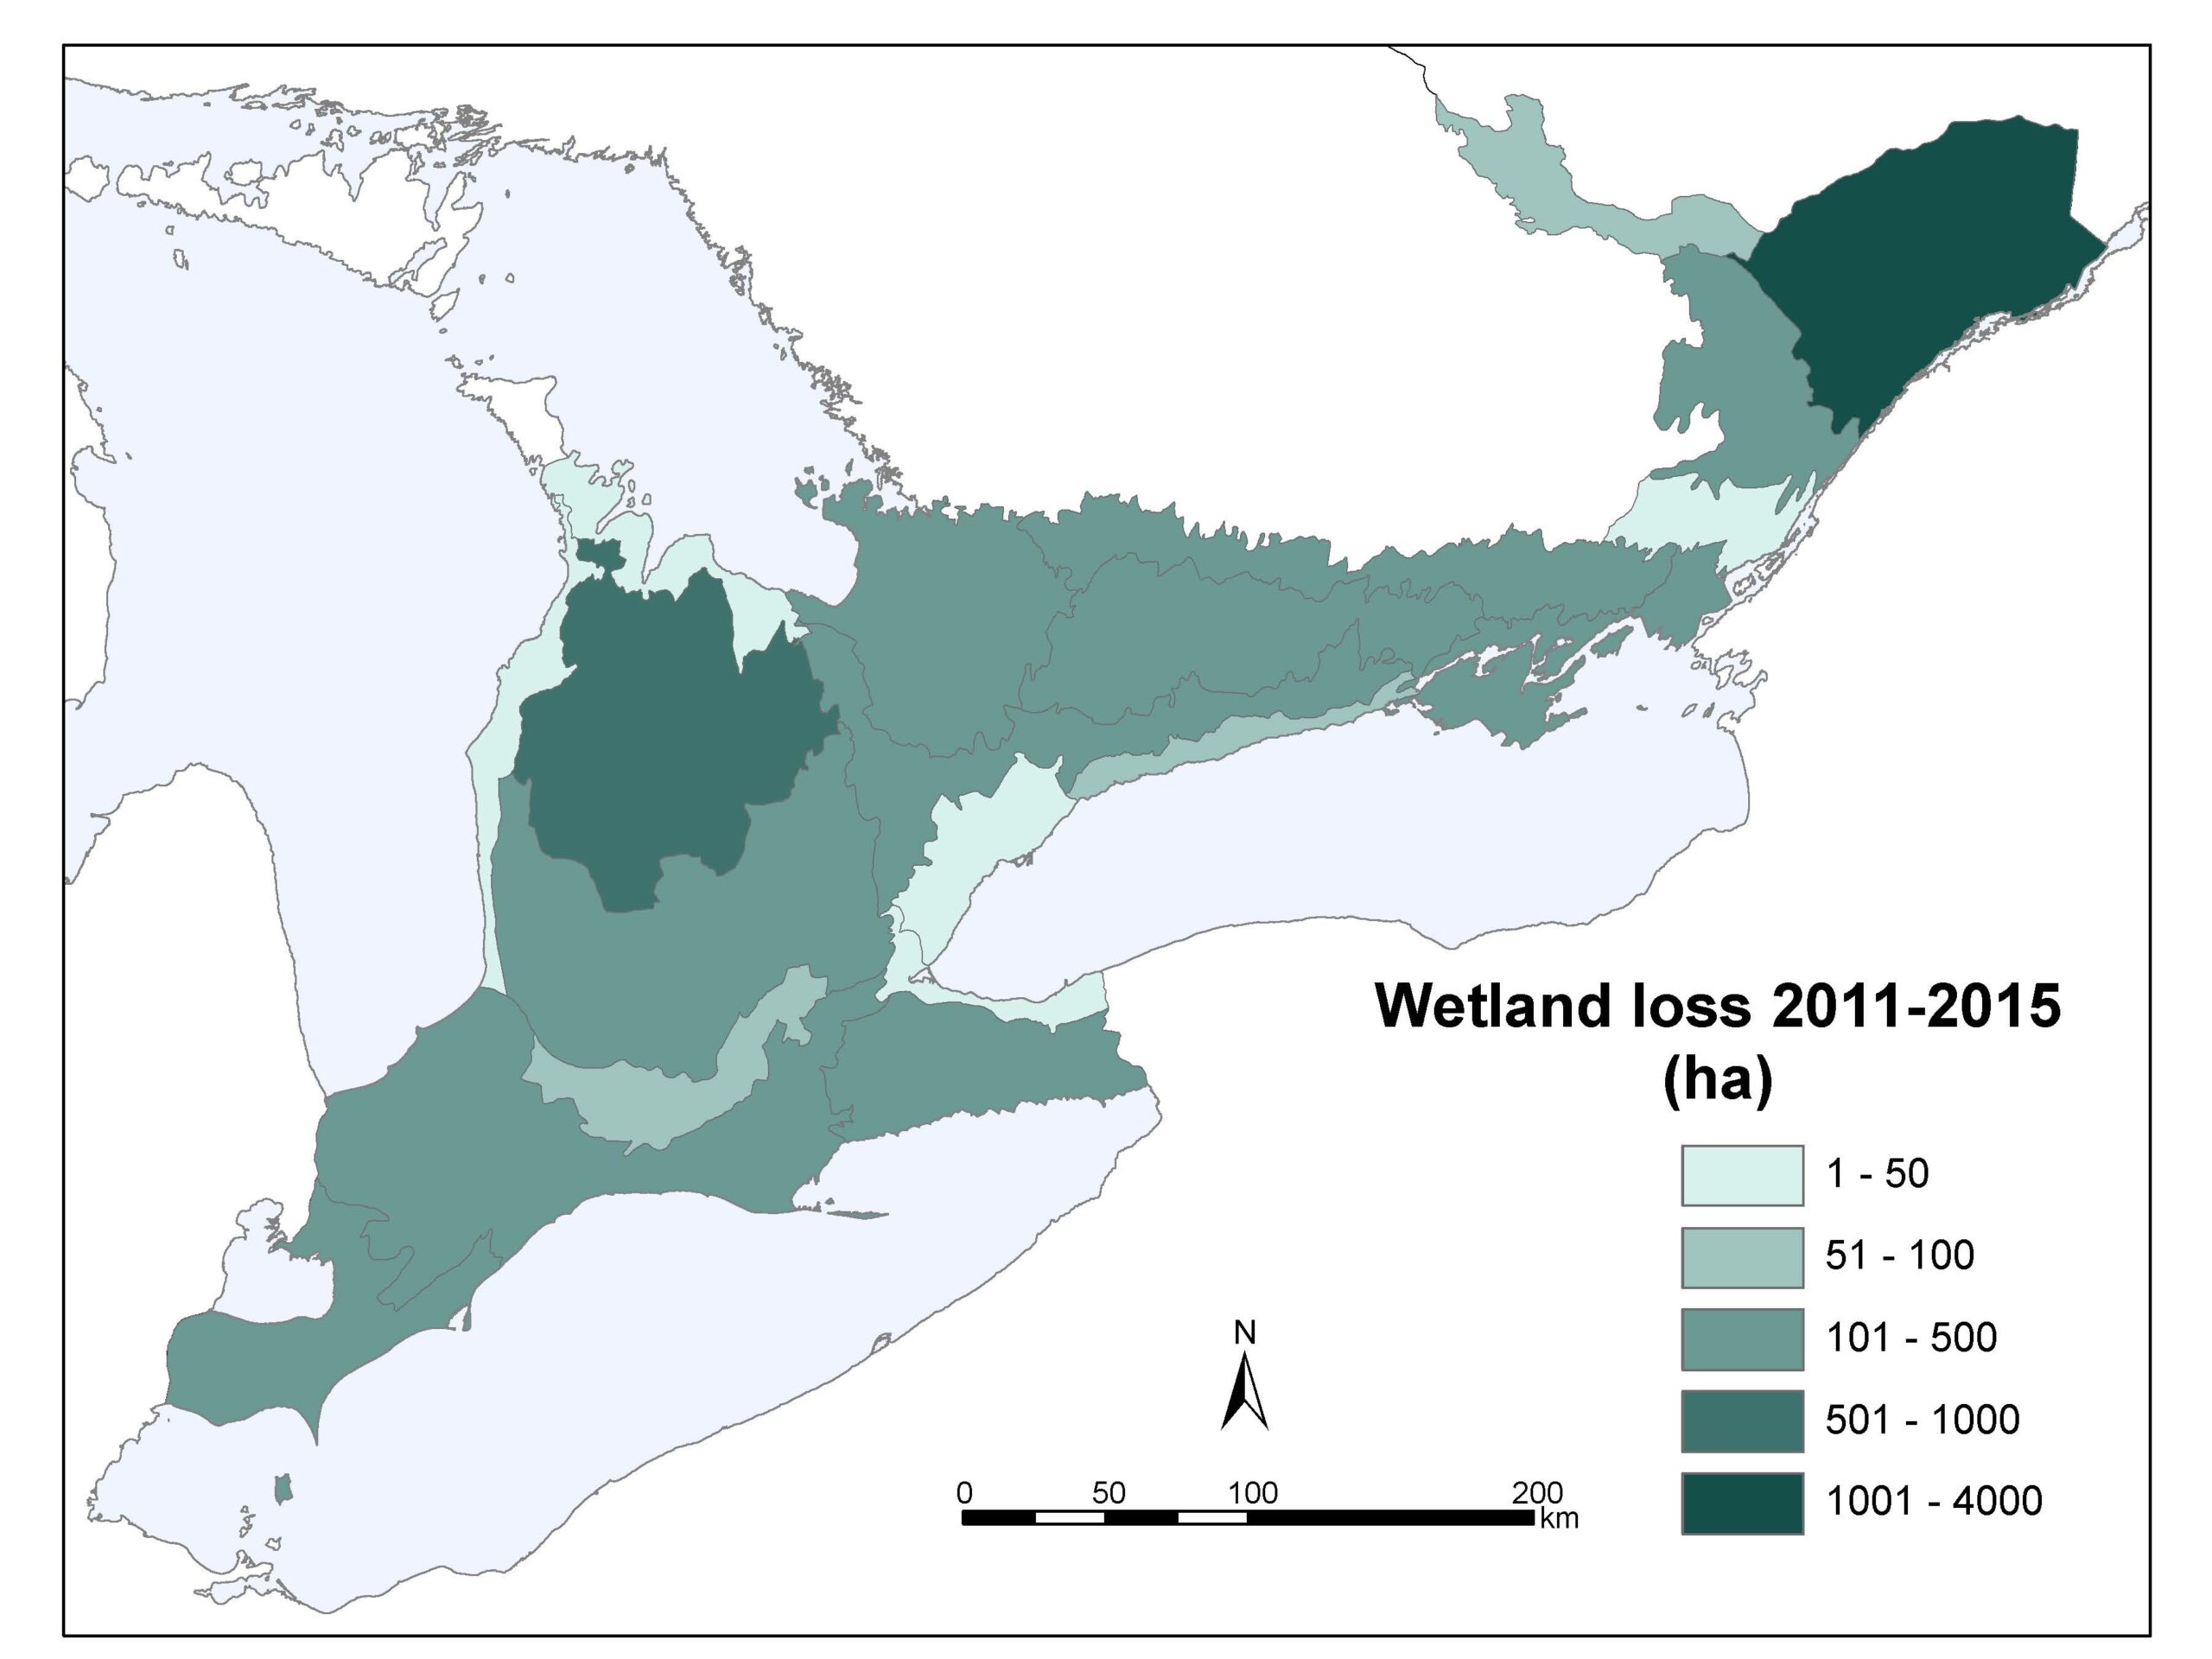 In Southern Ontario an estimated 72% of wetlands that were originally present have been lost. Loss in particularly acute in southwestern Ontario, where about 85% of wetlands have been converted to other uses. Source: Ontario Biodiversity Council